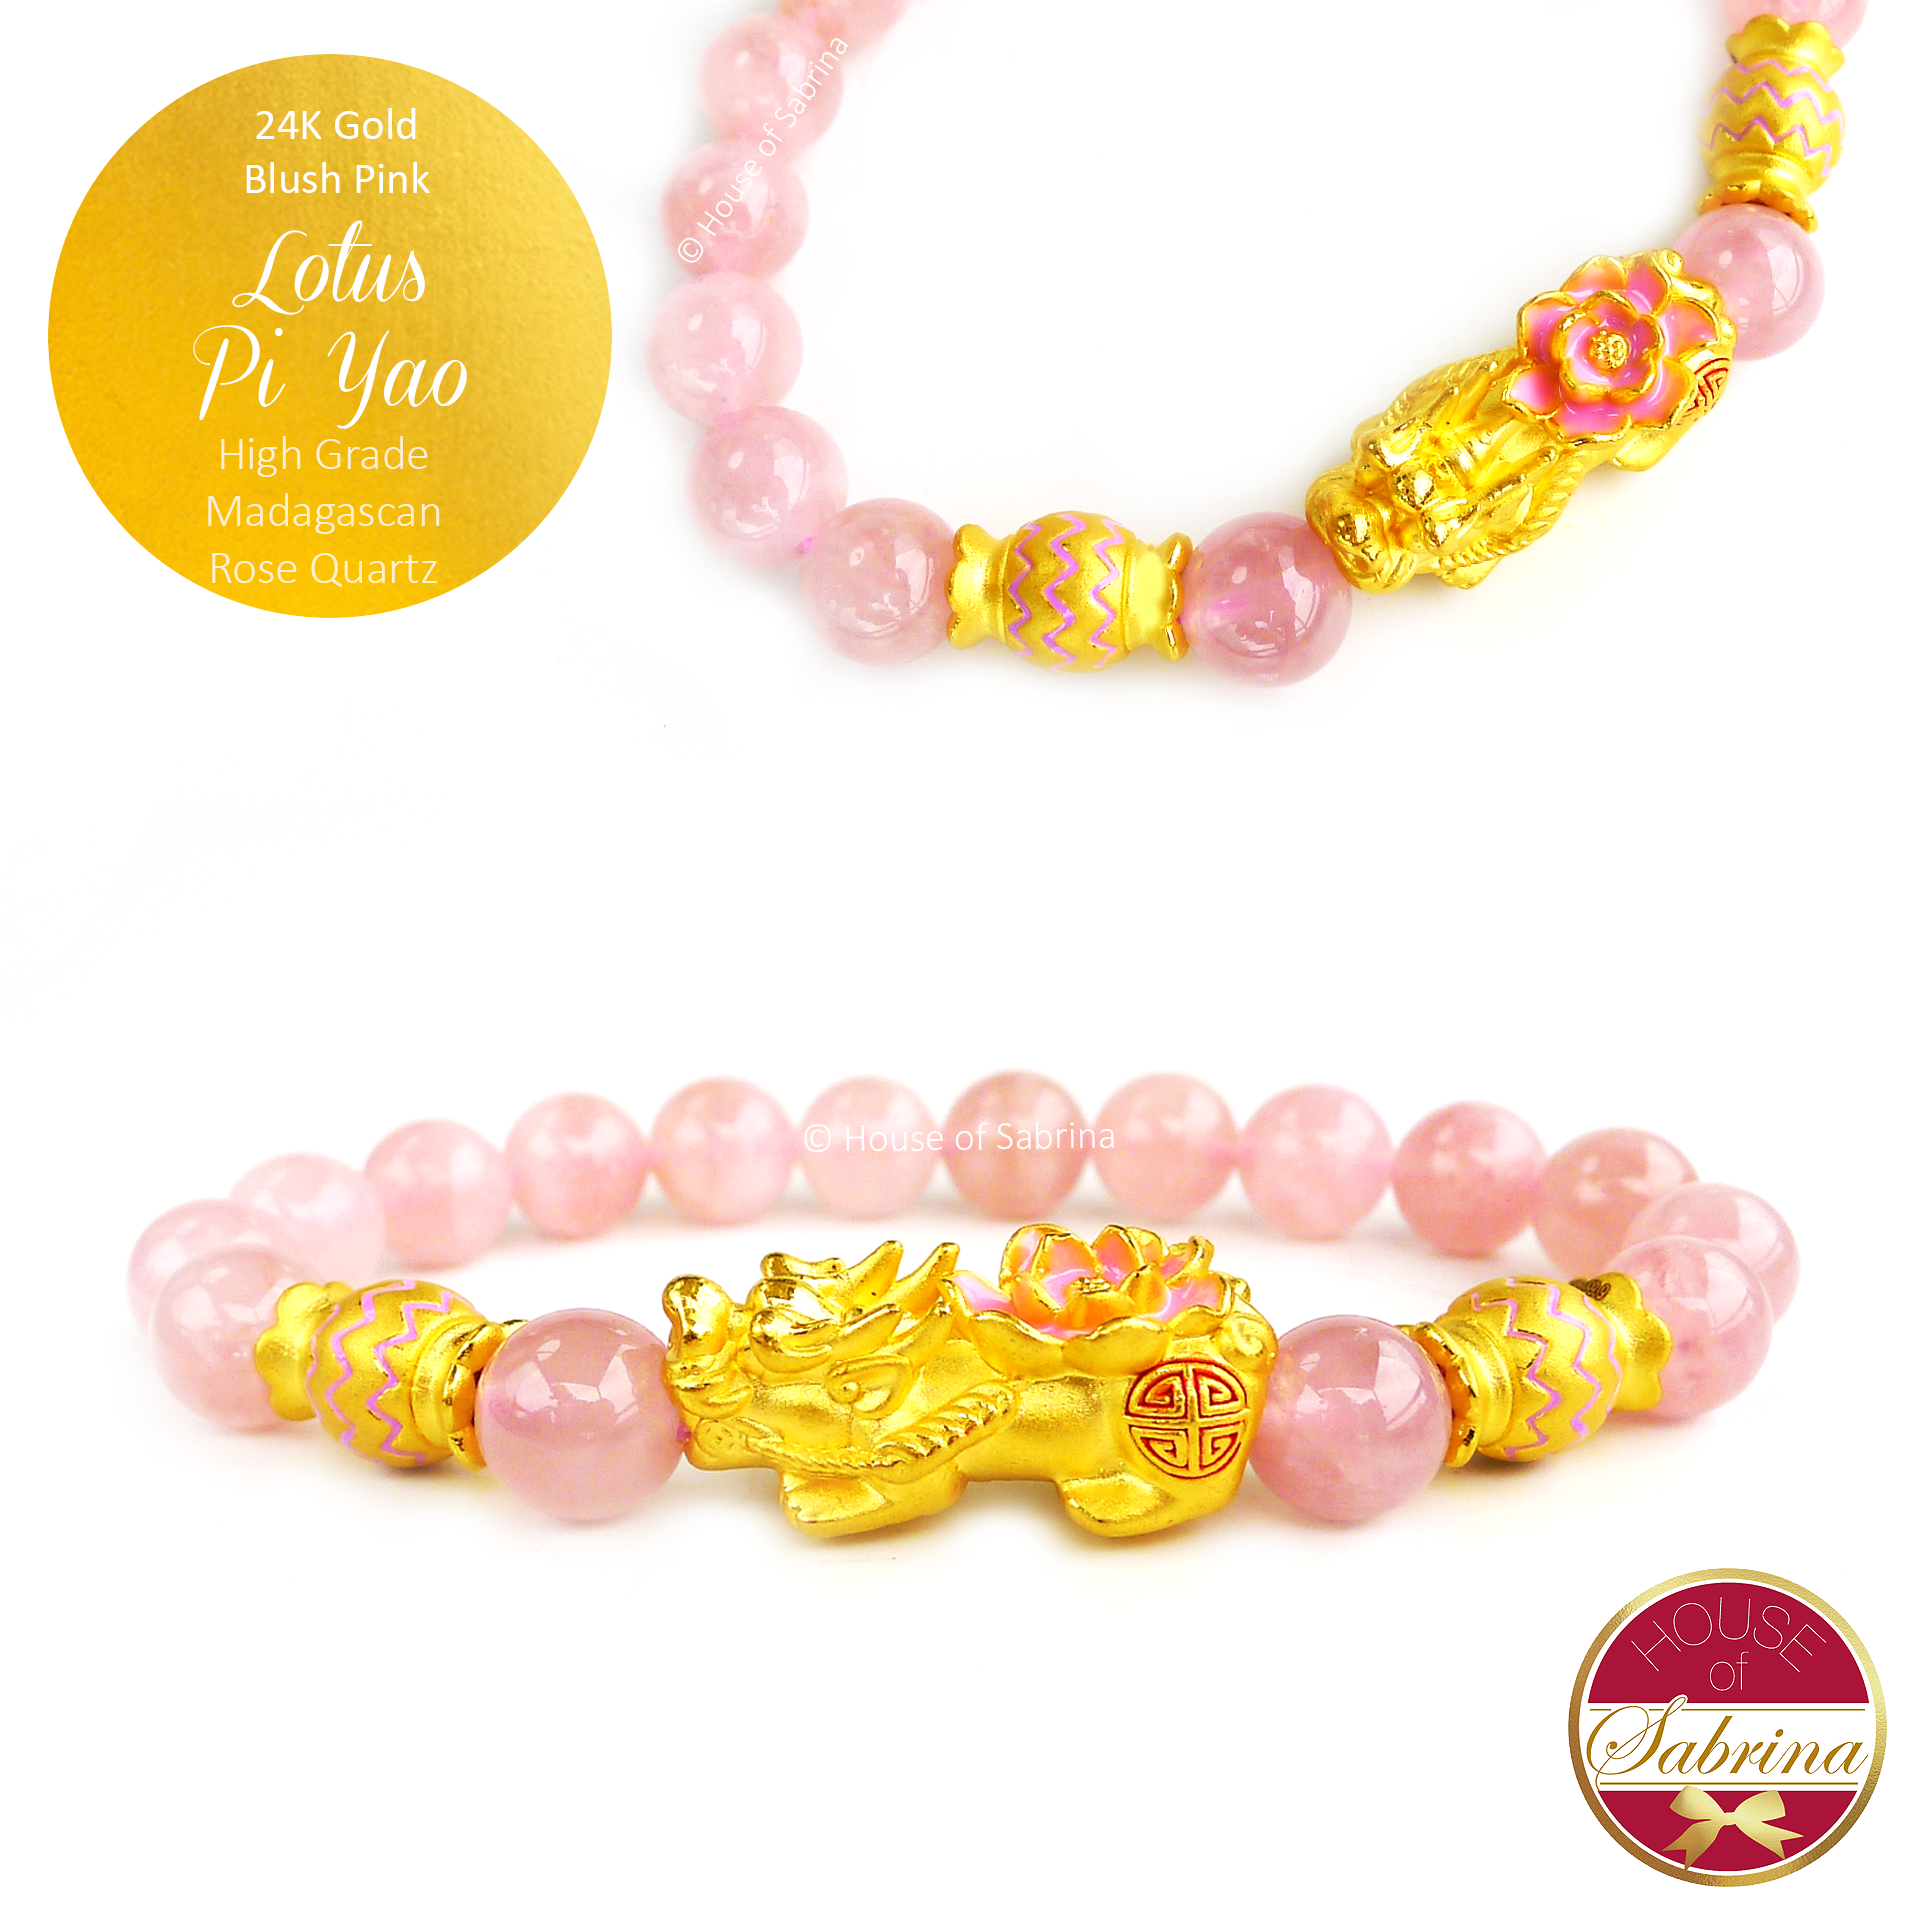 24K Gold Blush Pink Pi Yao Lotus with Candy Accents on High Grade Madagascan Rose Quartz